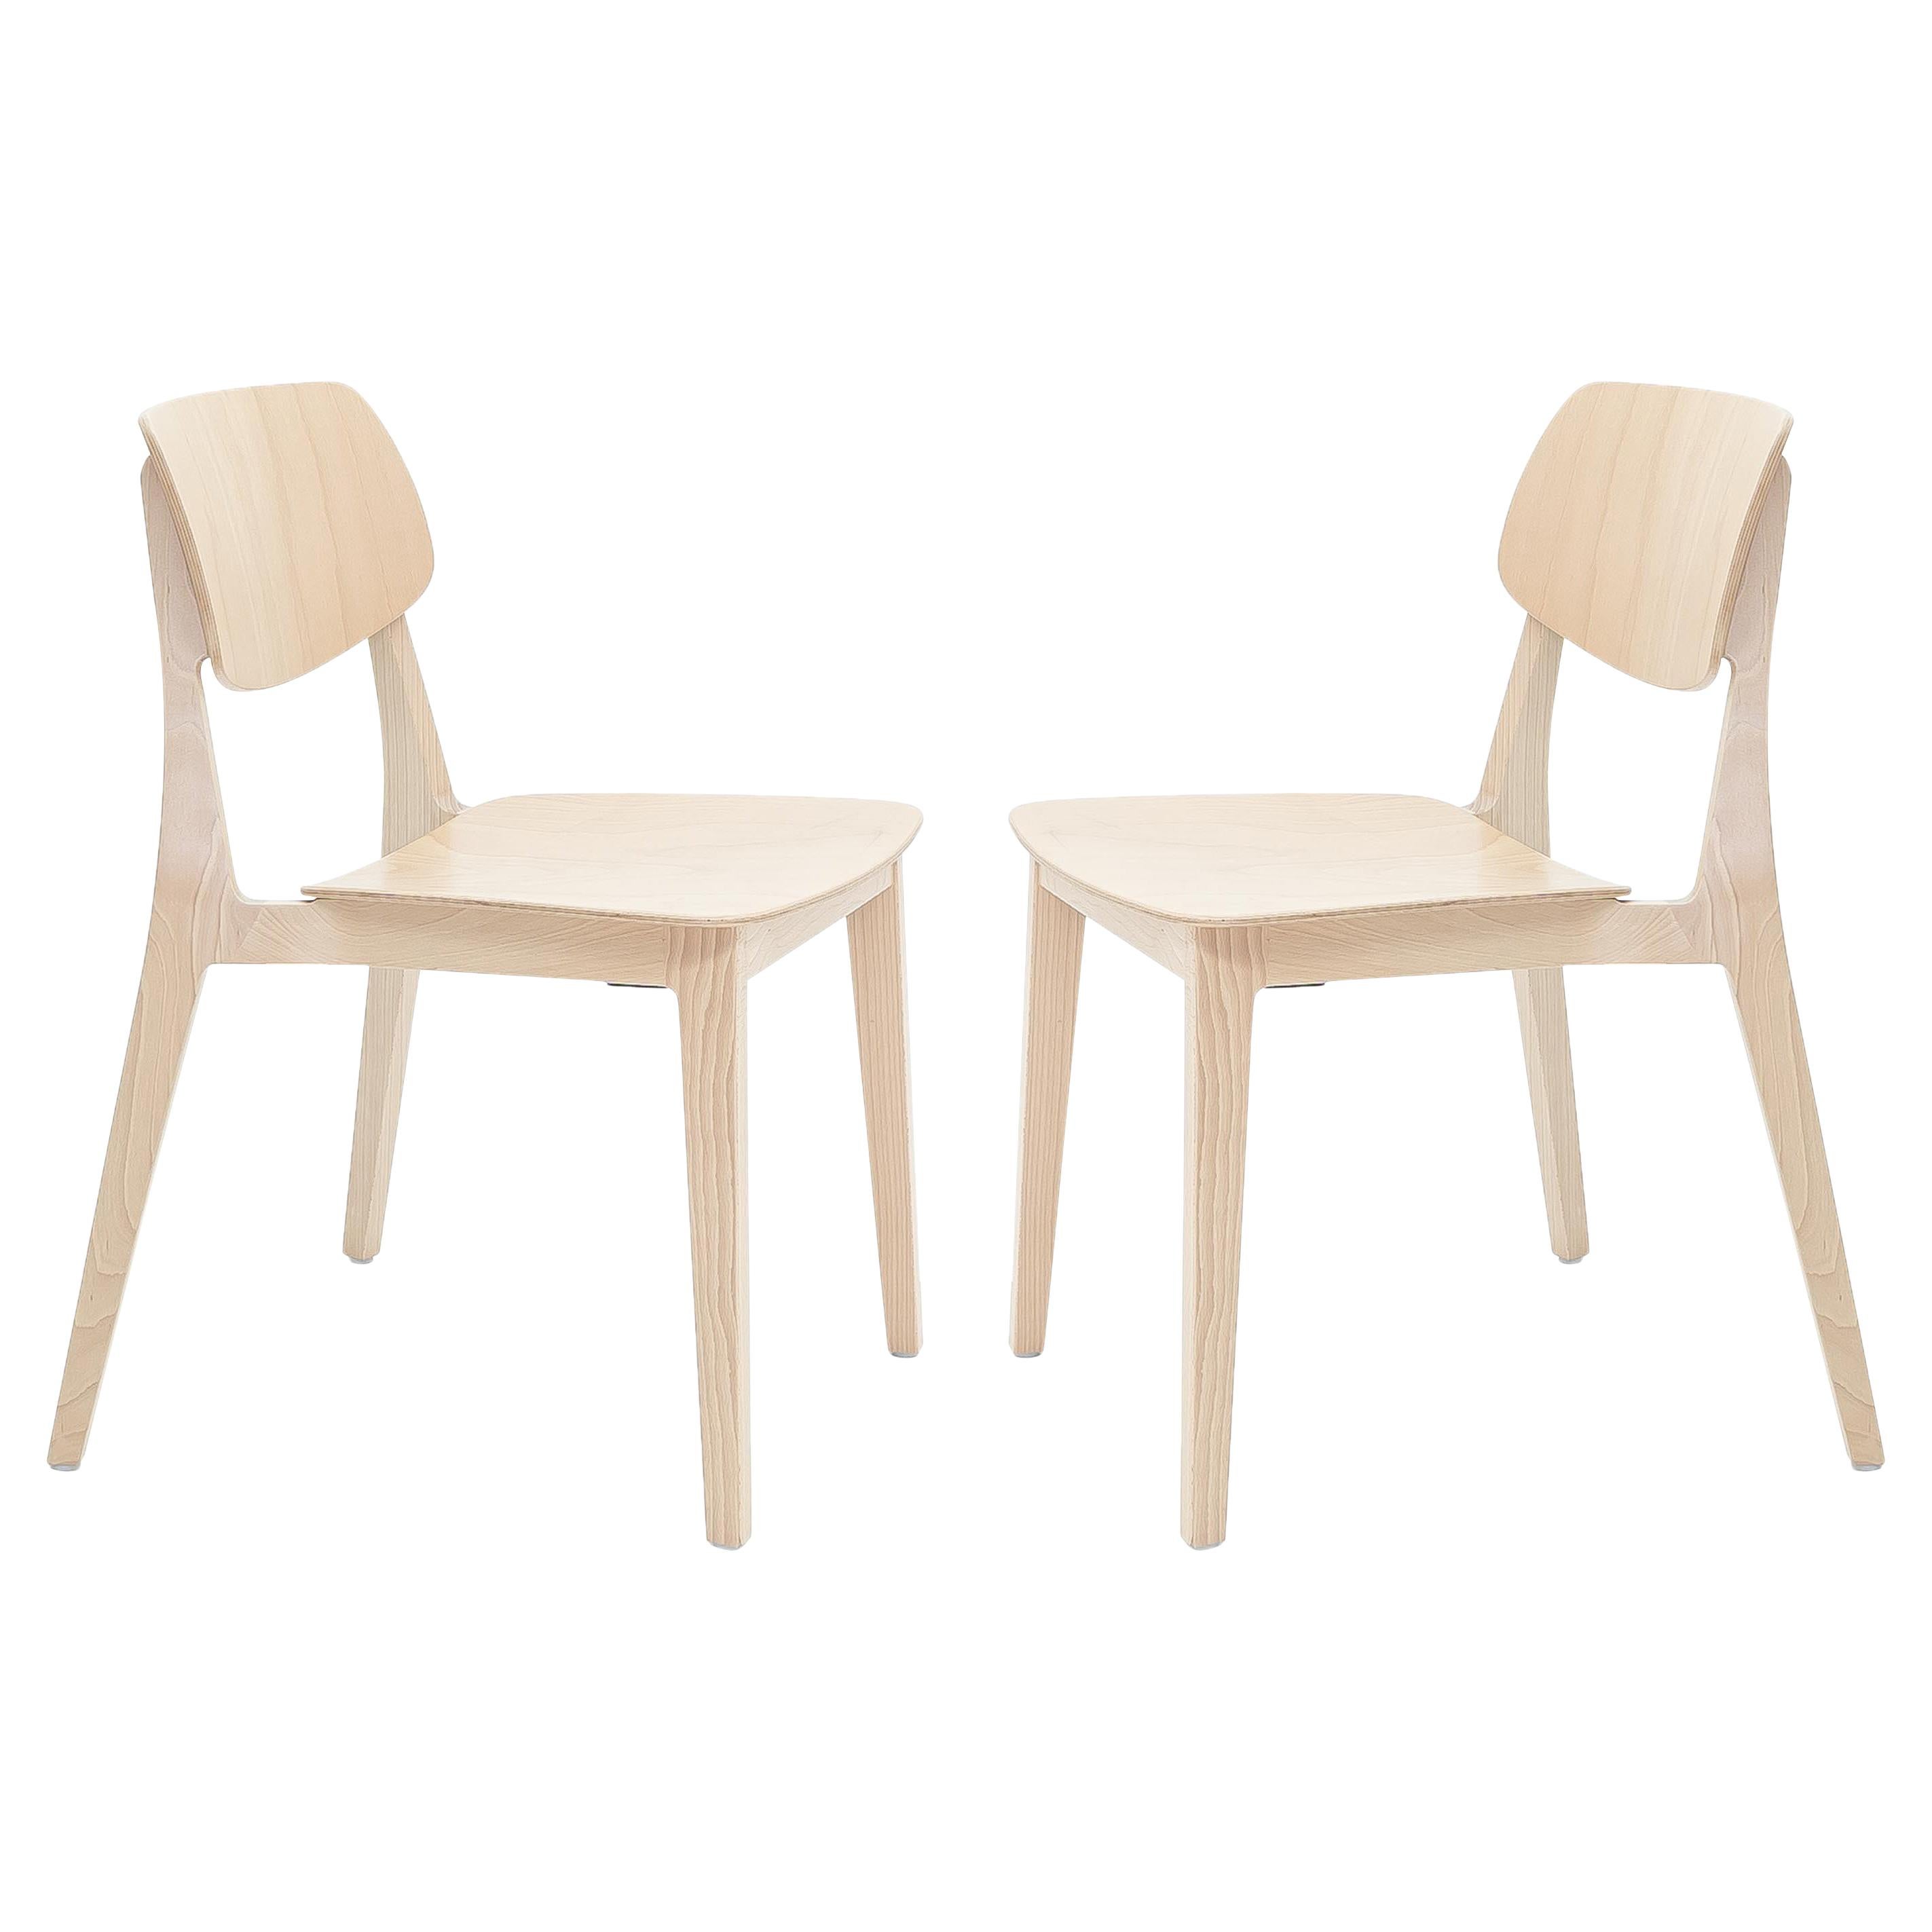 Felber C14 Beech Wood Chairs by Dietiker, Exchangeable Back and Seat, Set of 2